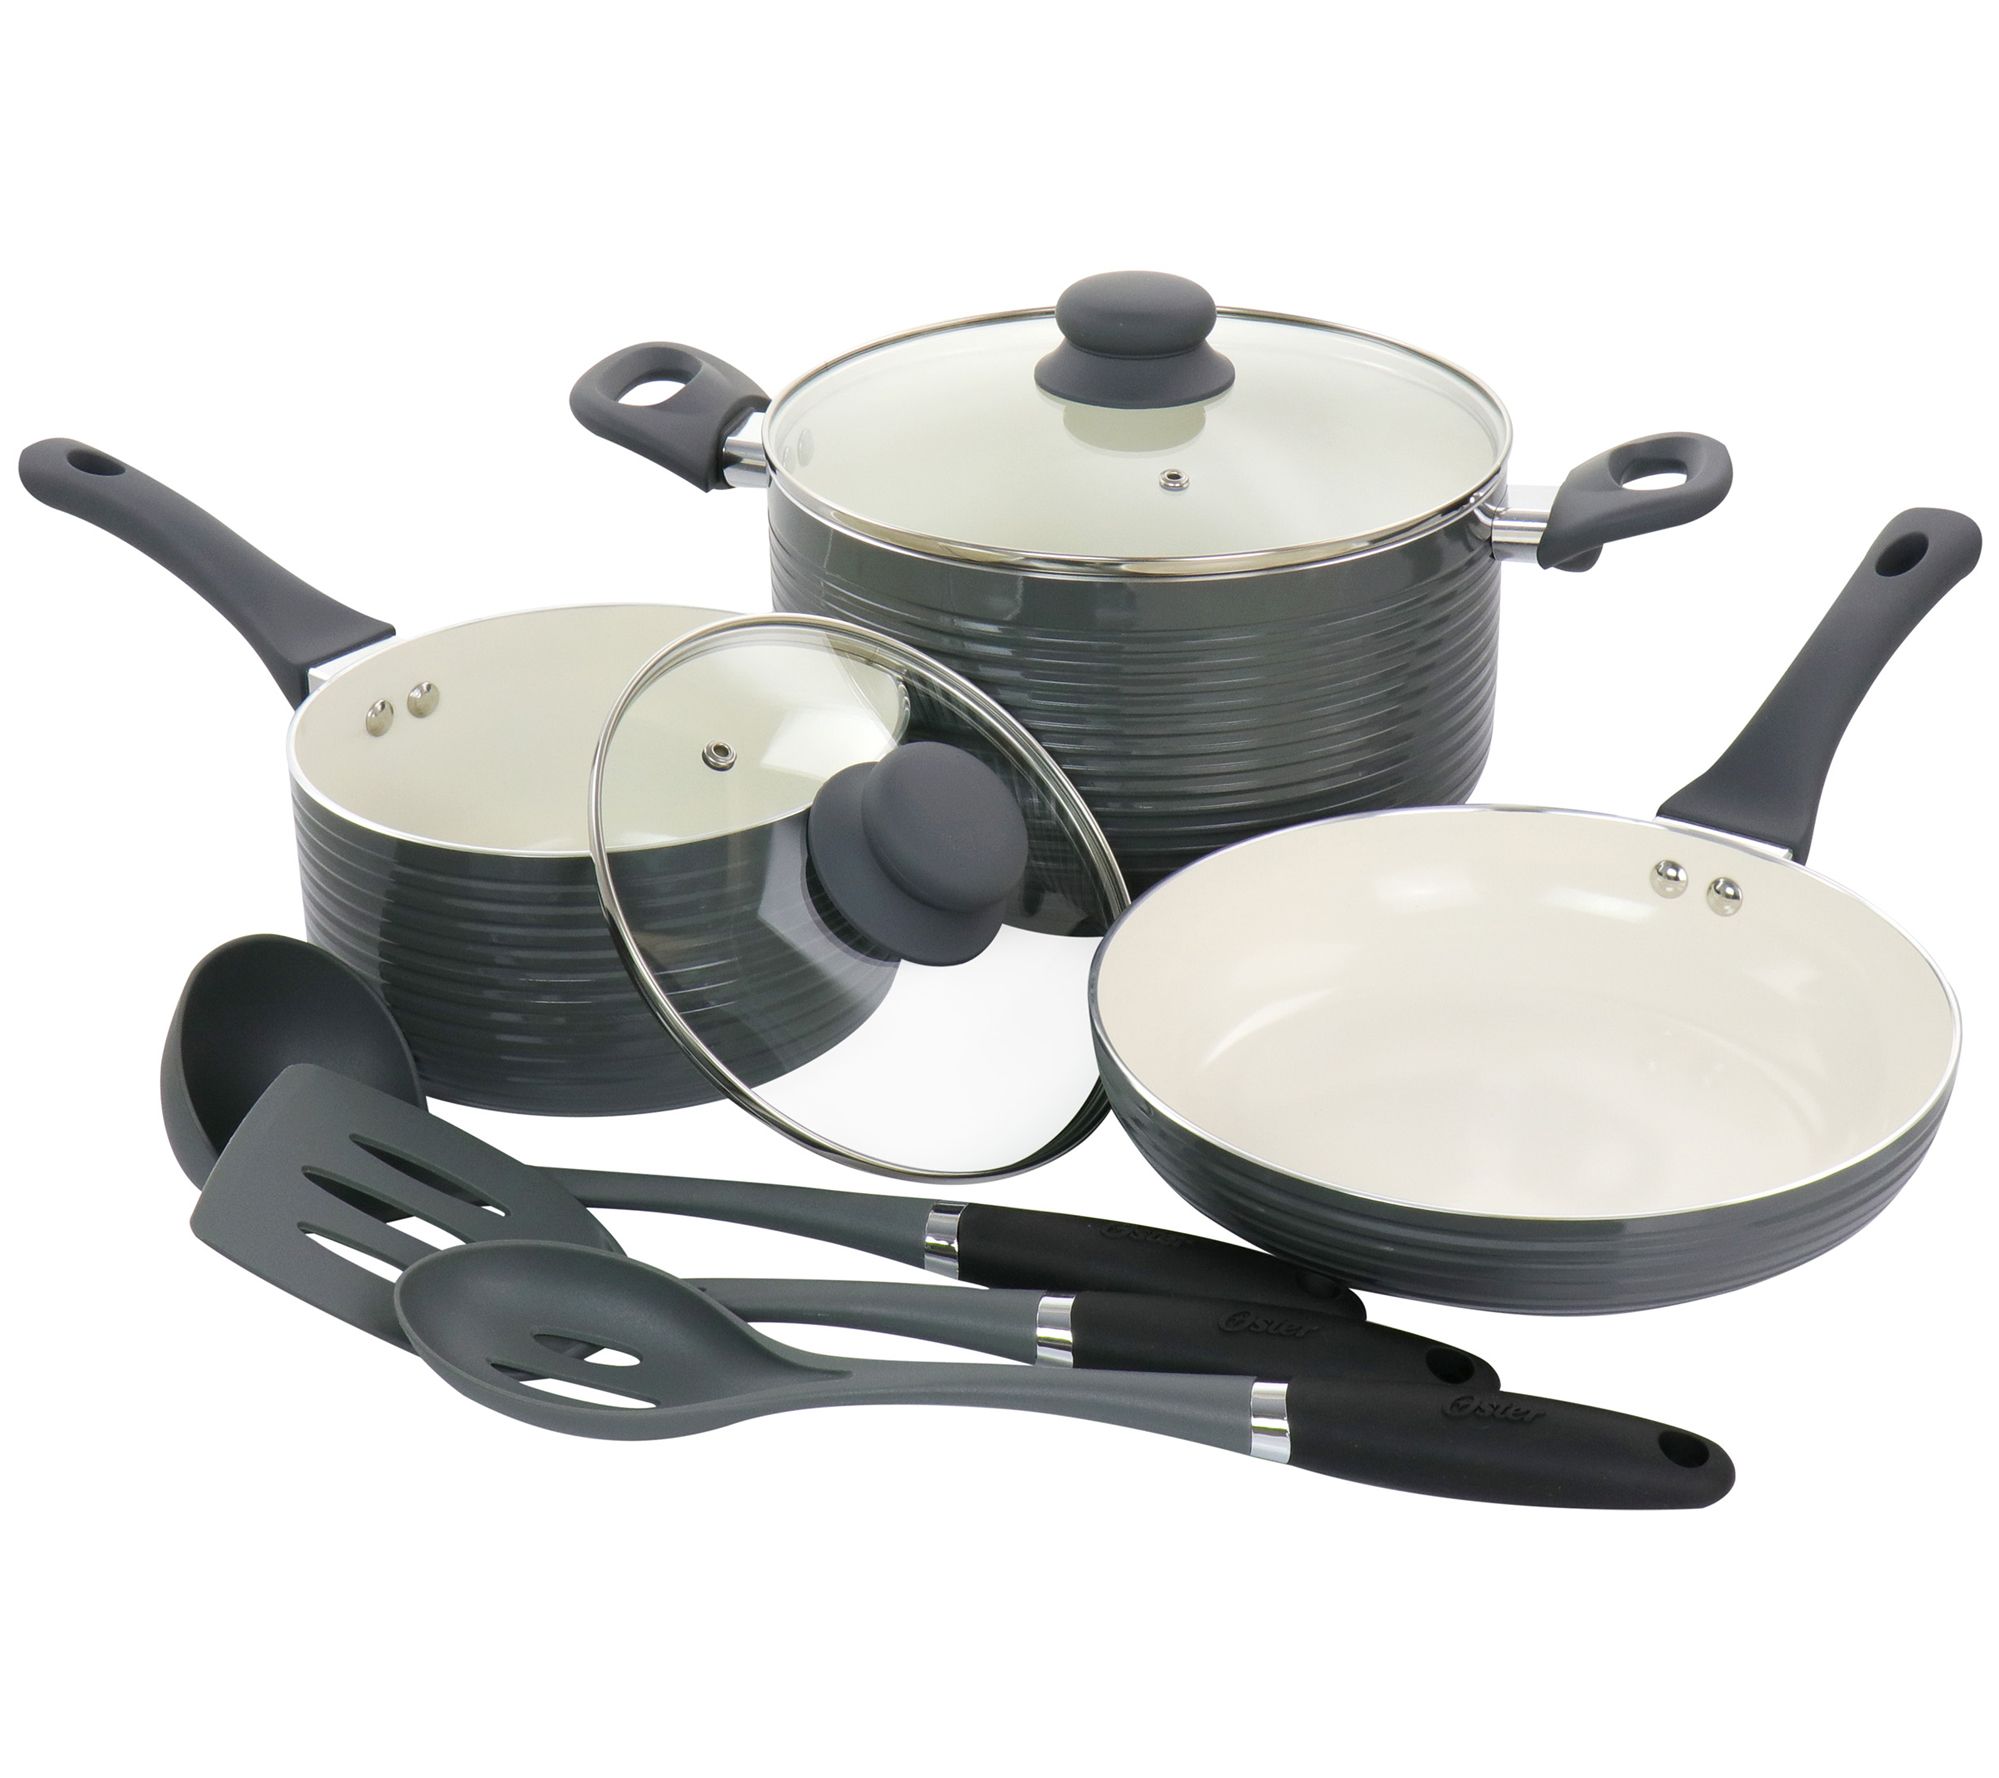 Oster Rametto 8-Piece Stainless Steel Kitchen Cookware Set with